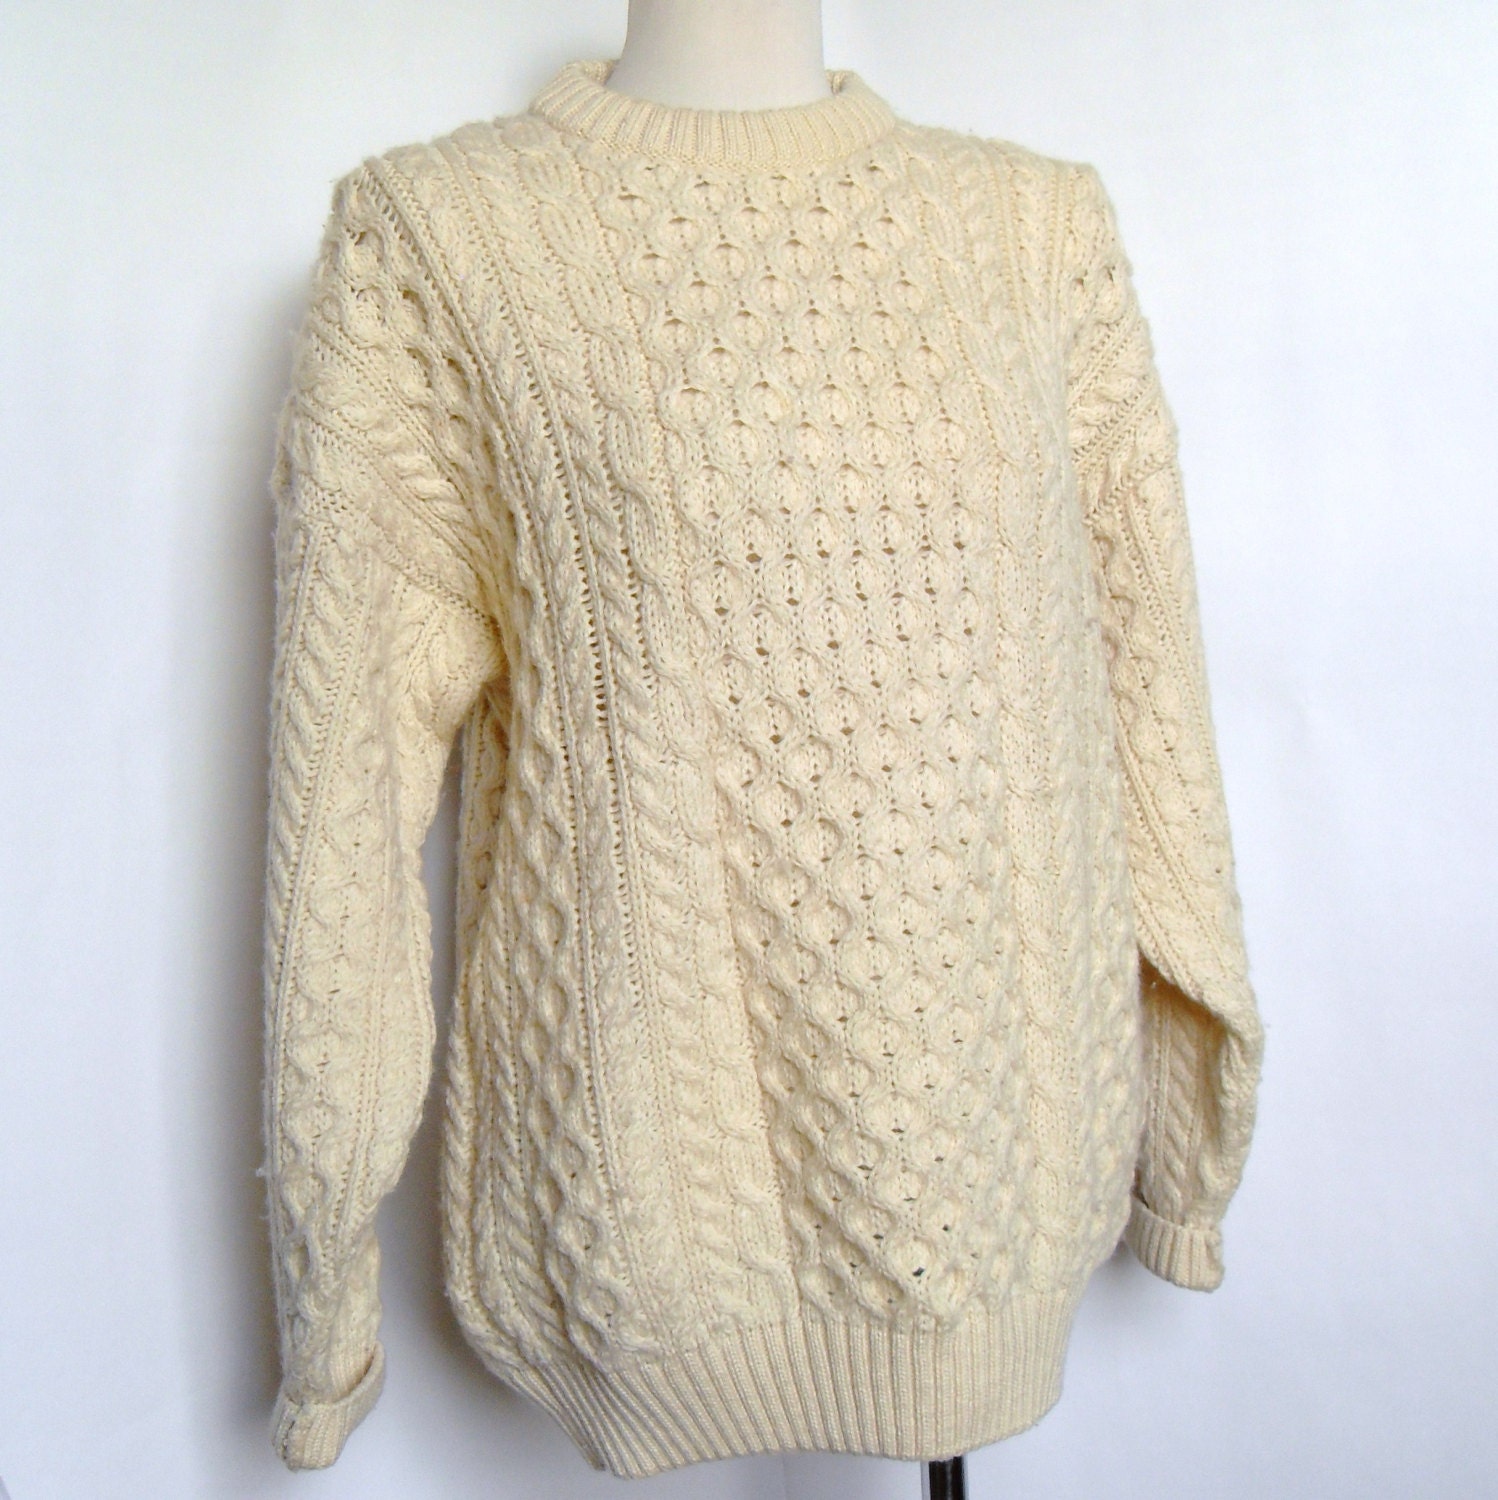 Cream Colored Fisherman Cable Knit Sweater Handknit and Made